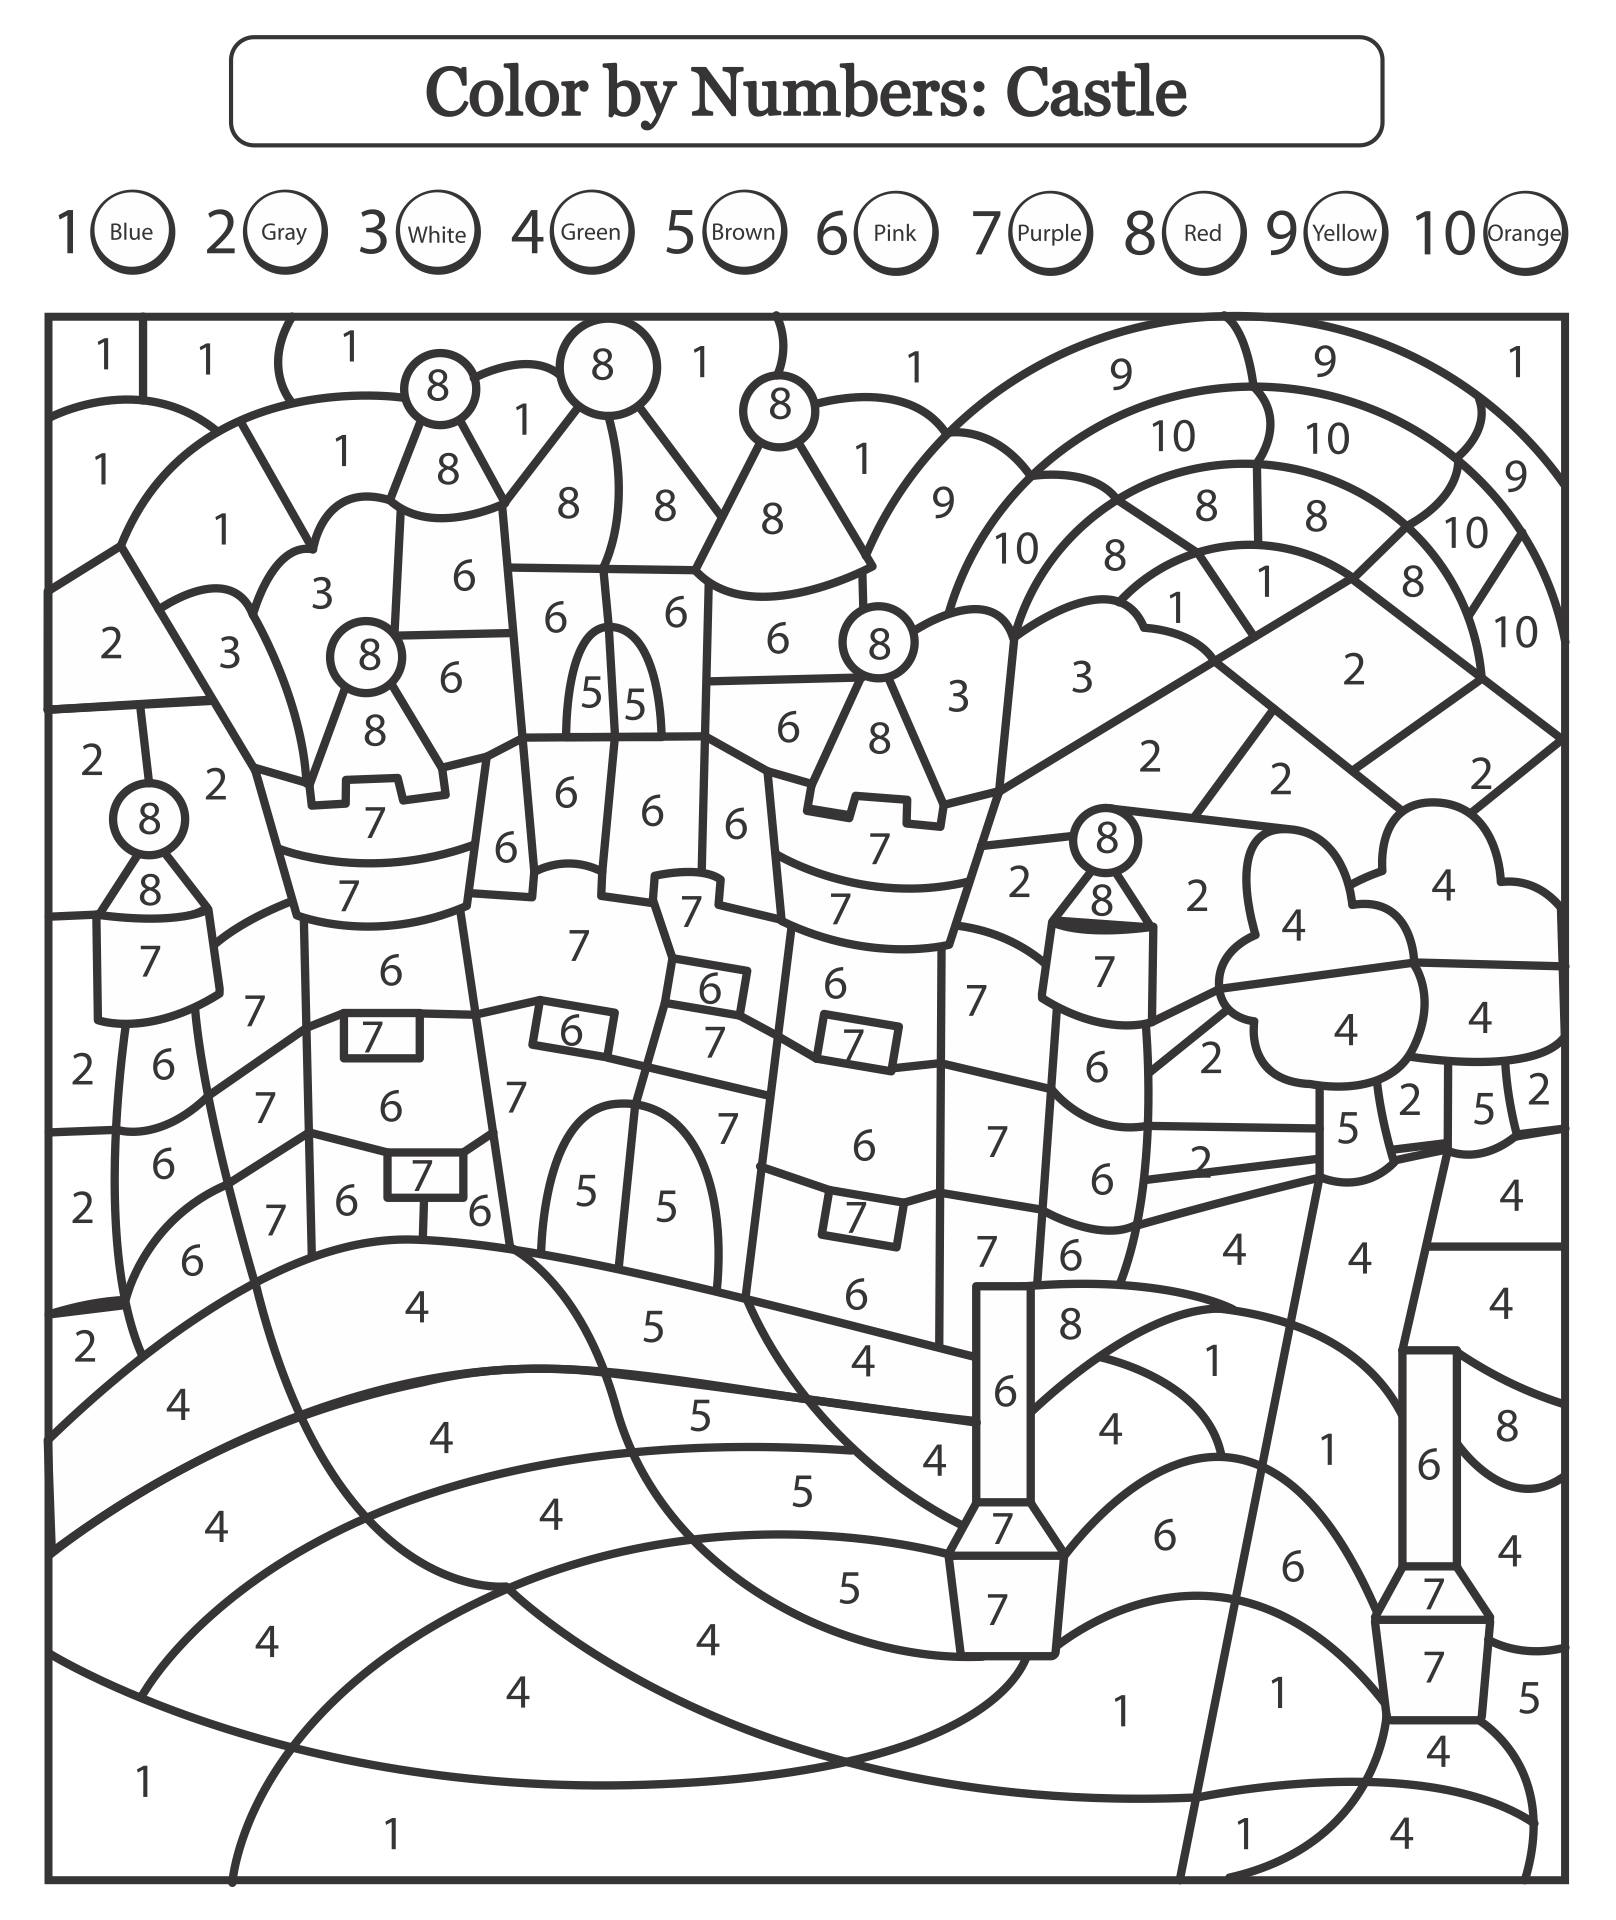 Castle Color by Number Coloring Pages